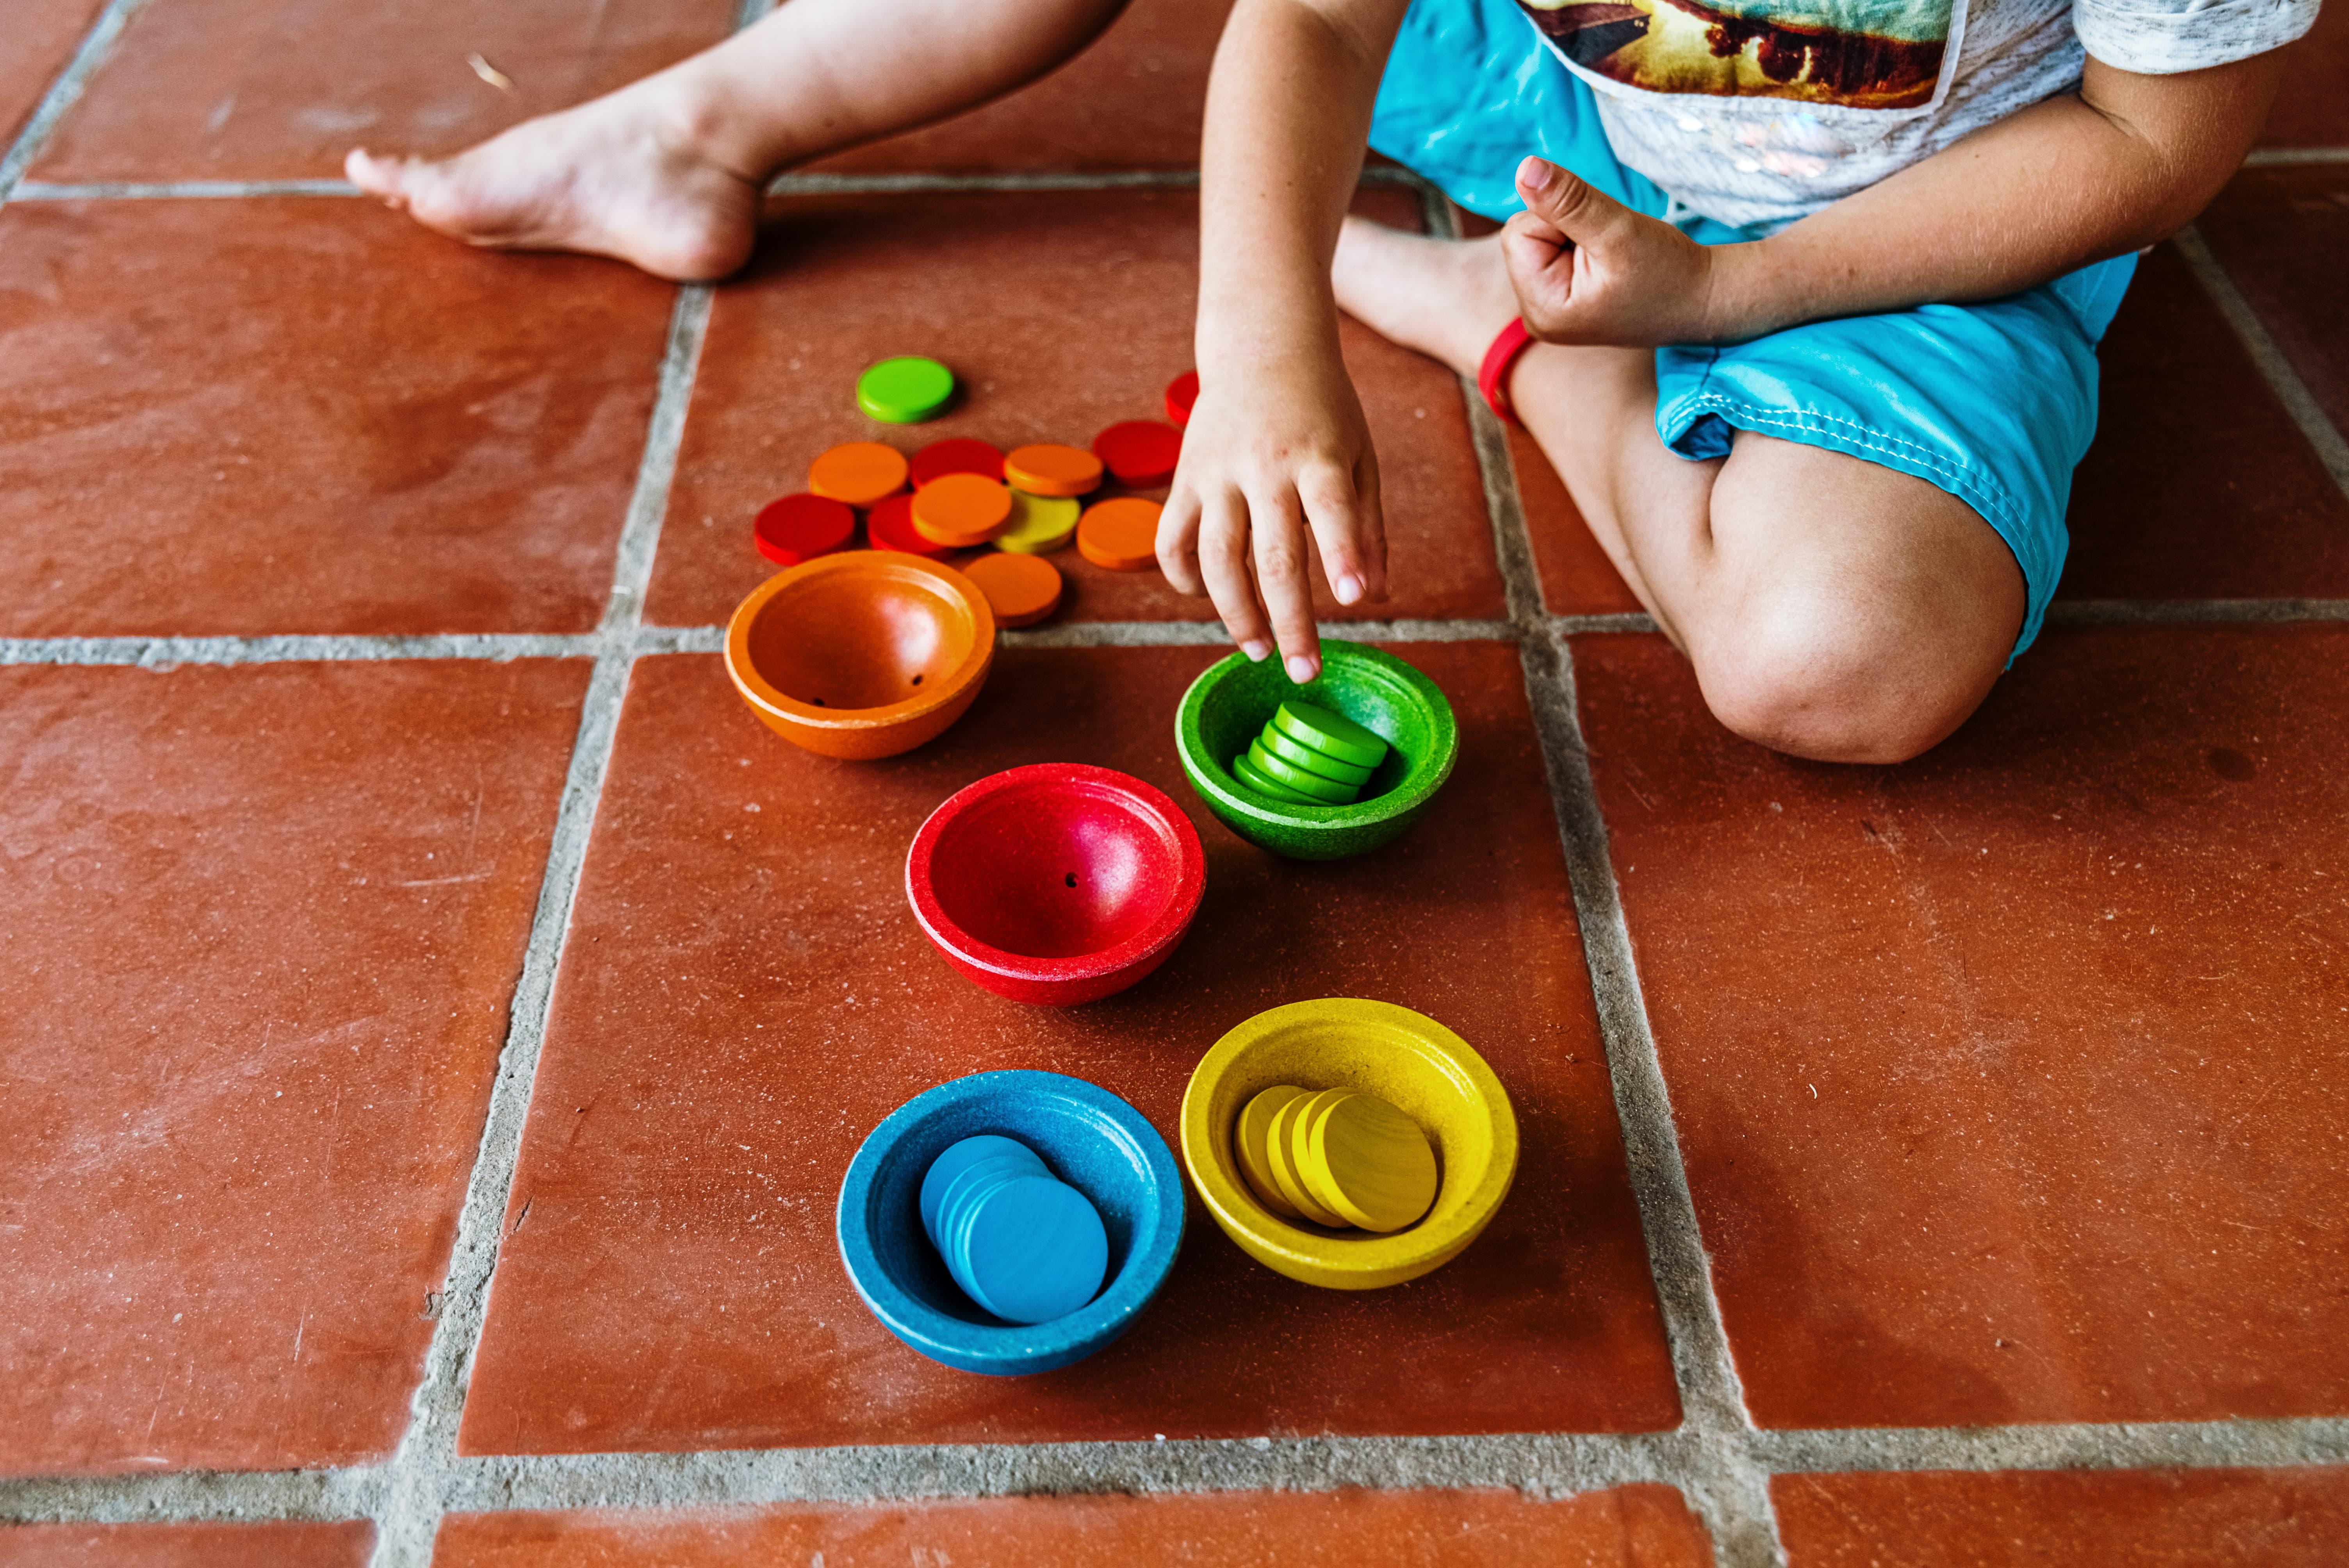 Montessori's Child - Centred Approach to Learning Differences